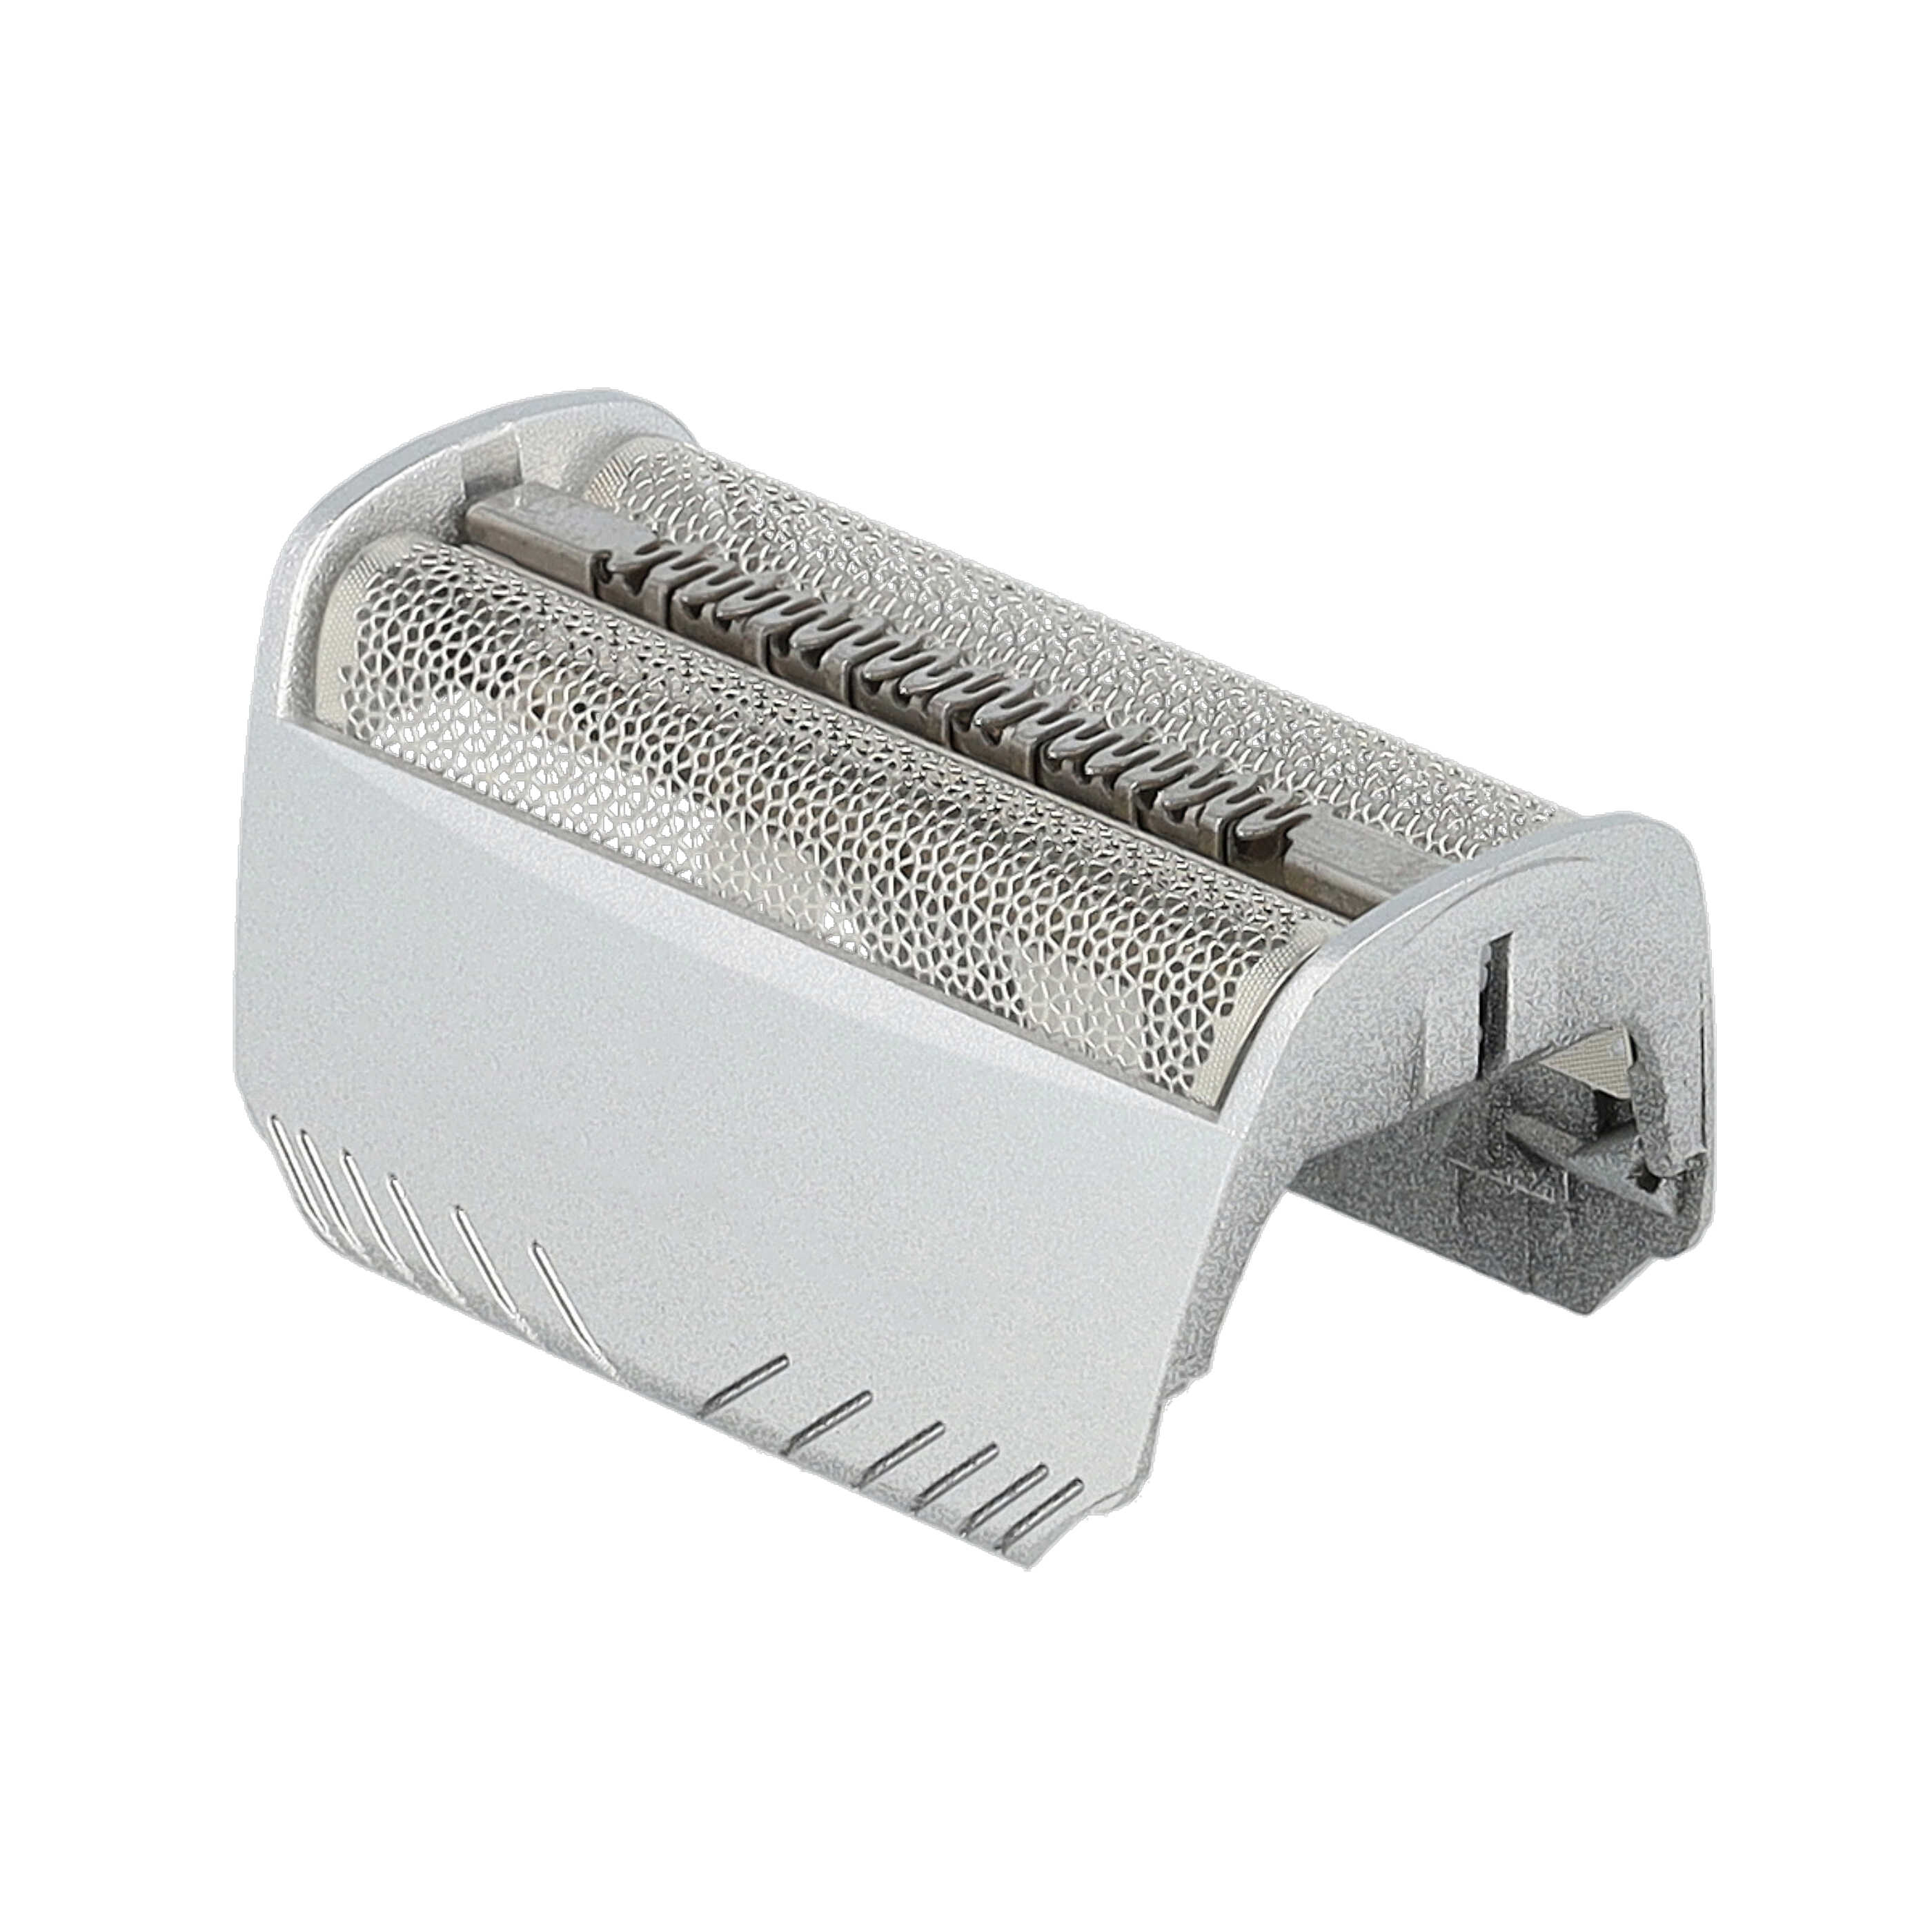 Combi Pack Shaver Part replaces Braun 30B Mul, 30B, 30S for for Razor - Foil + Blades, Silver 